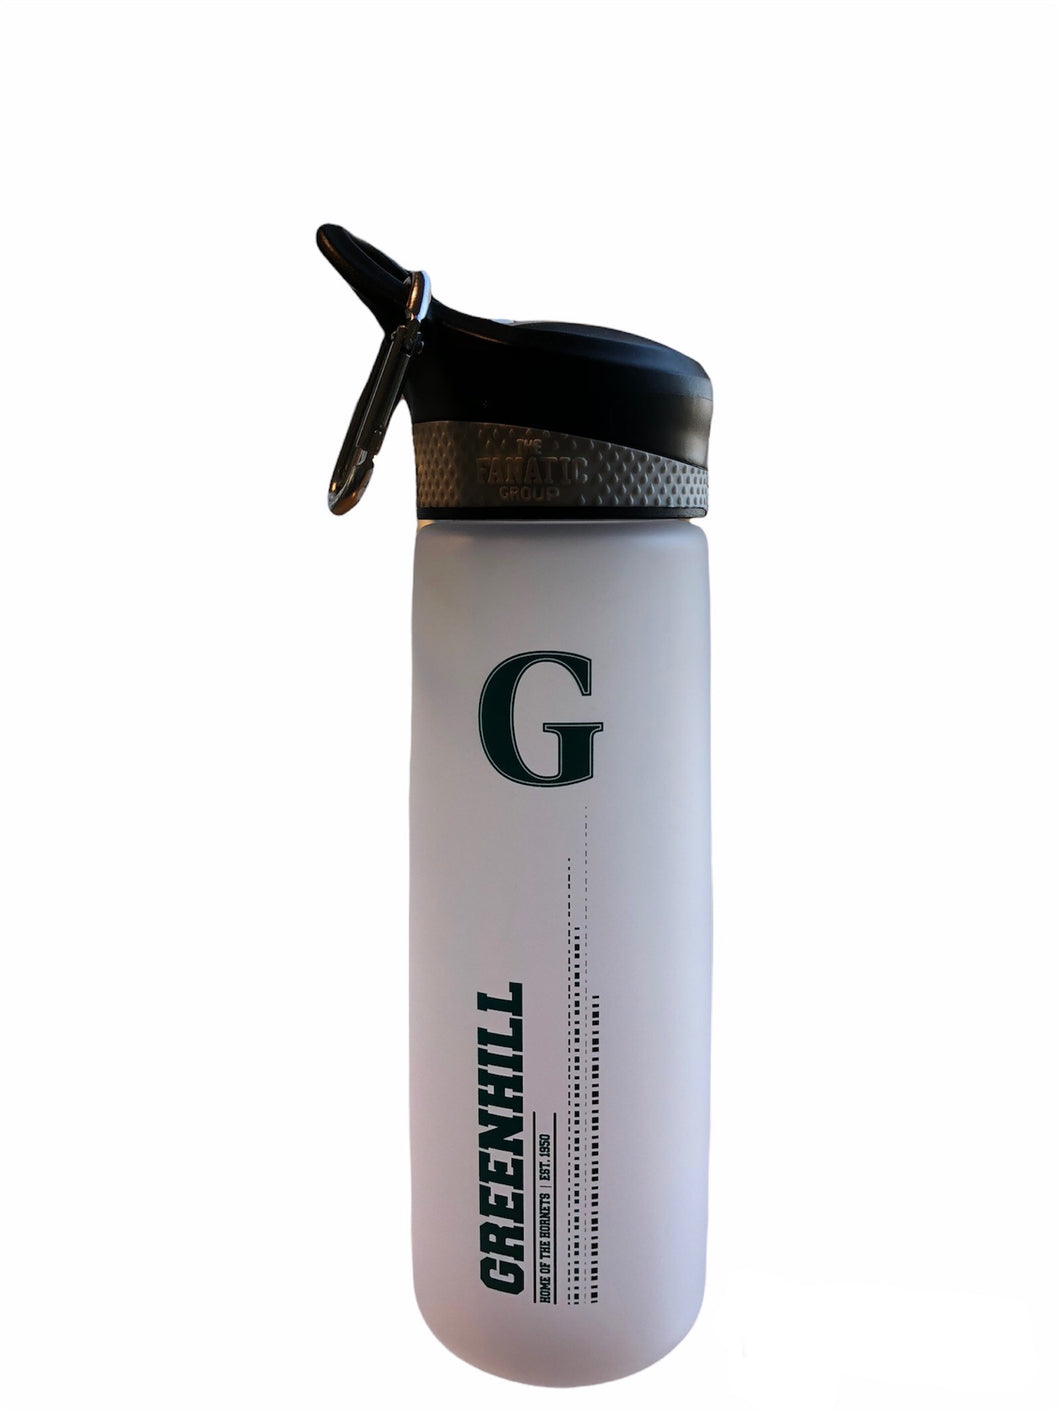 Greenhill Tundra Home of the Hornets Water Bottle 24oz